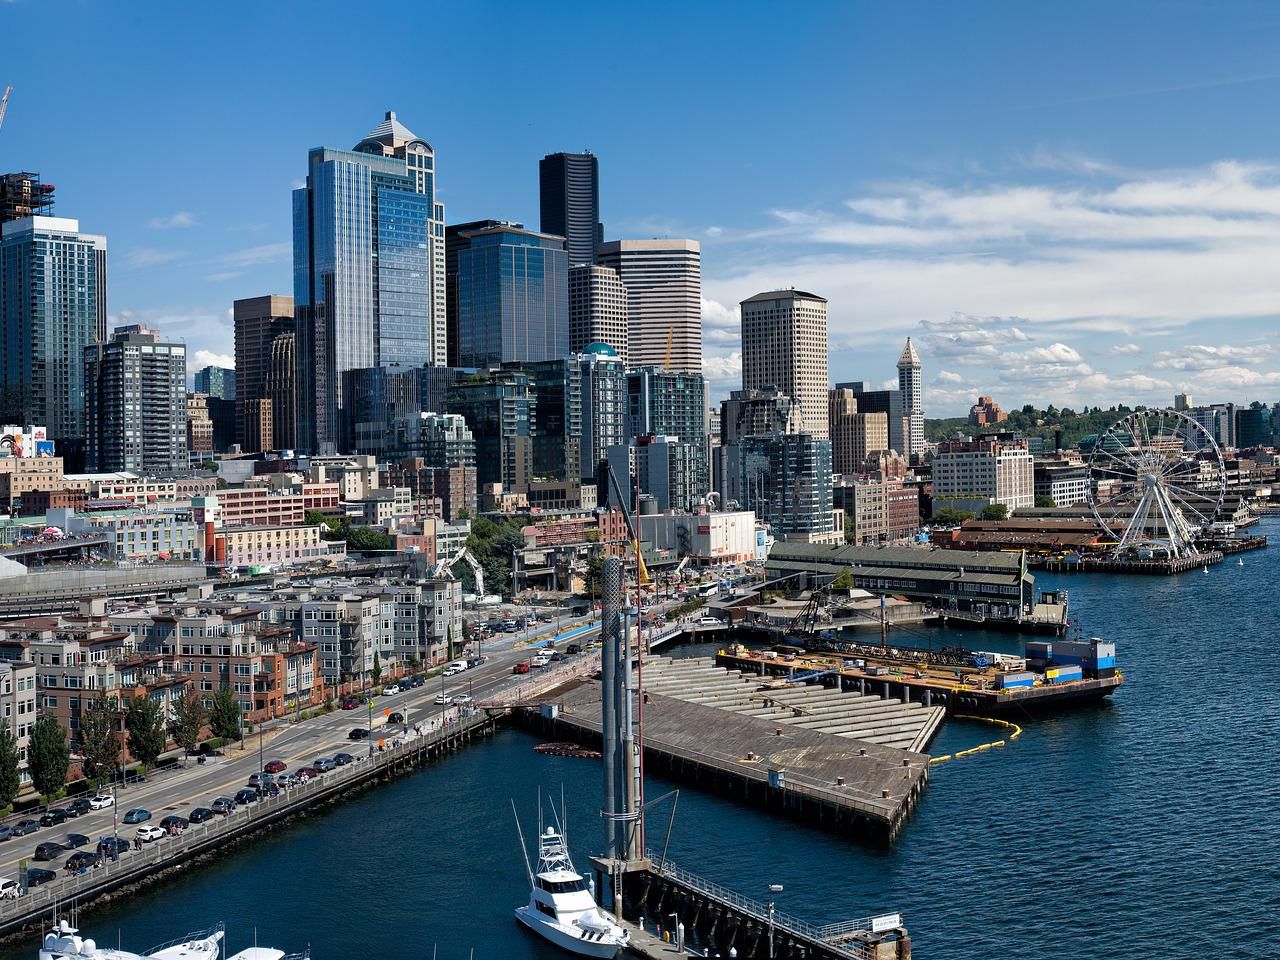 Enhance your cruise experience by choosing the Crowne Plaza Hotel Seattle, conveniently located near the Port of Seattle.